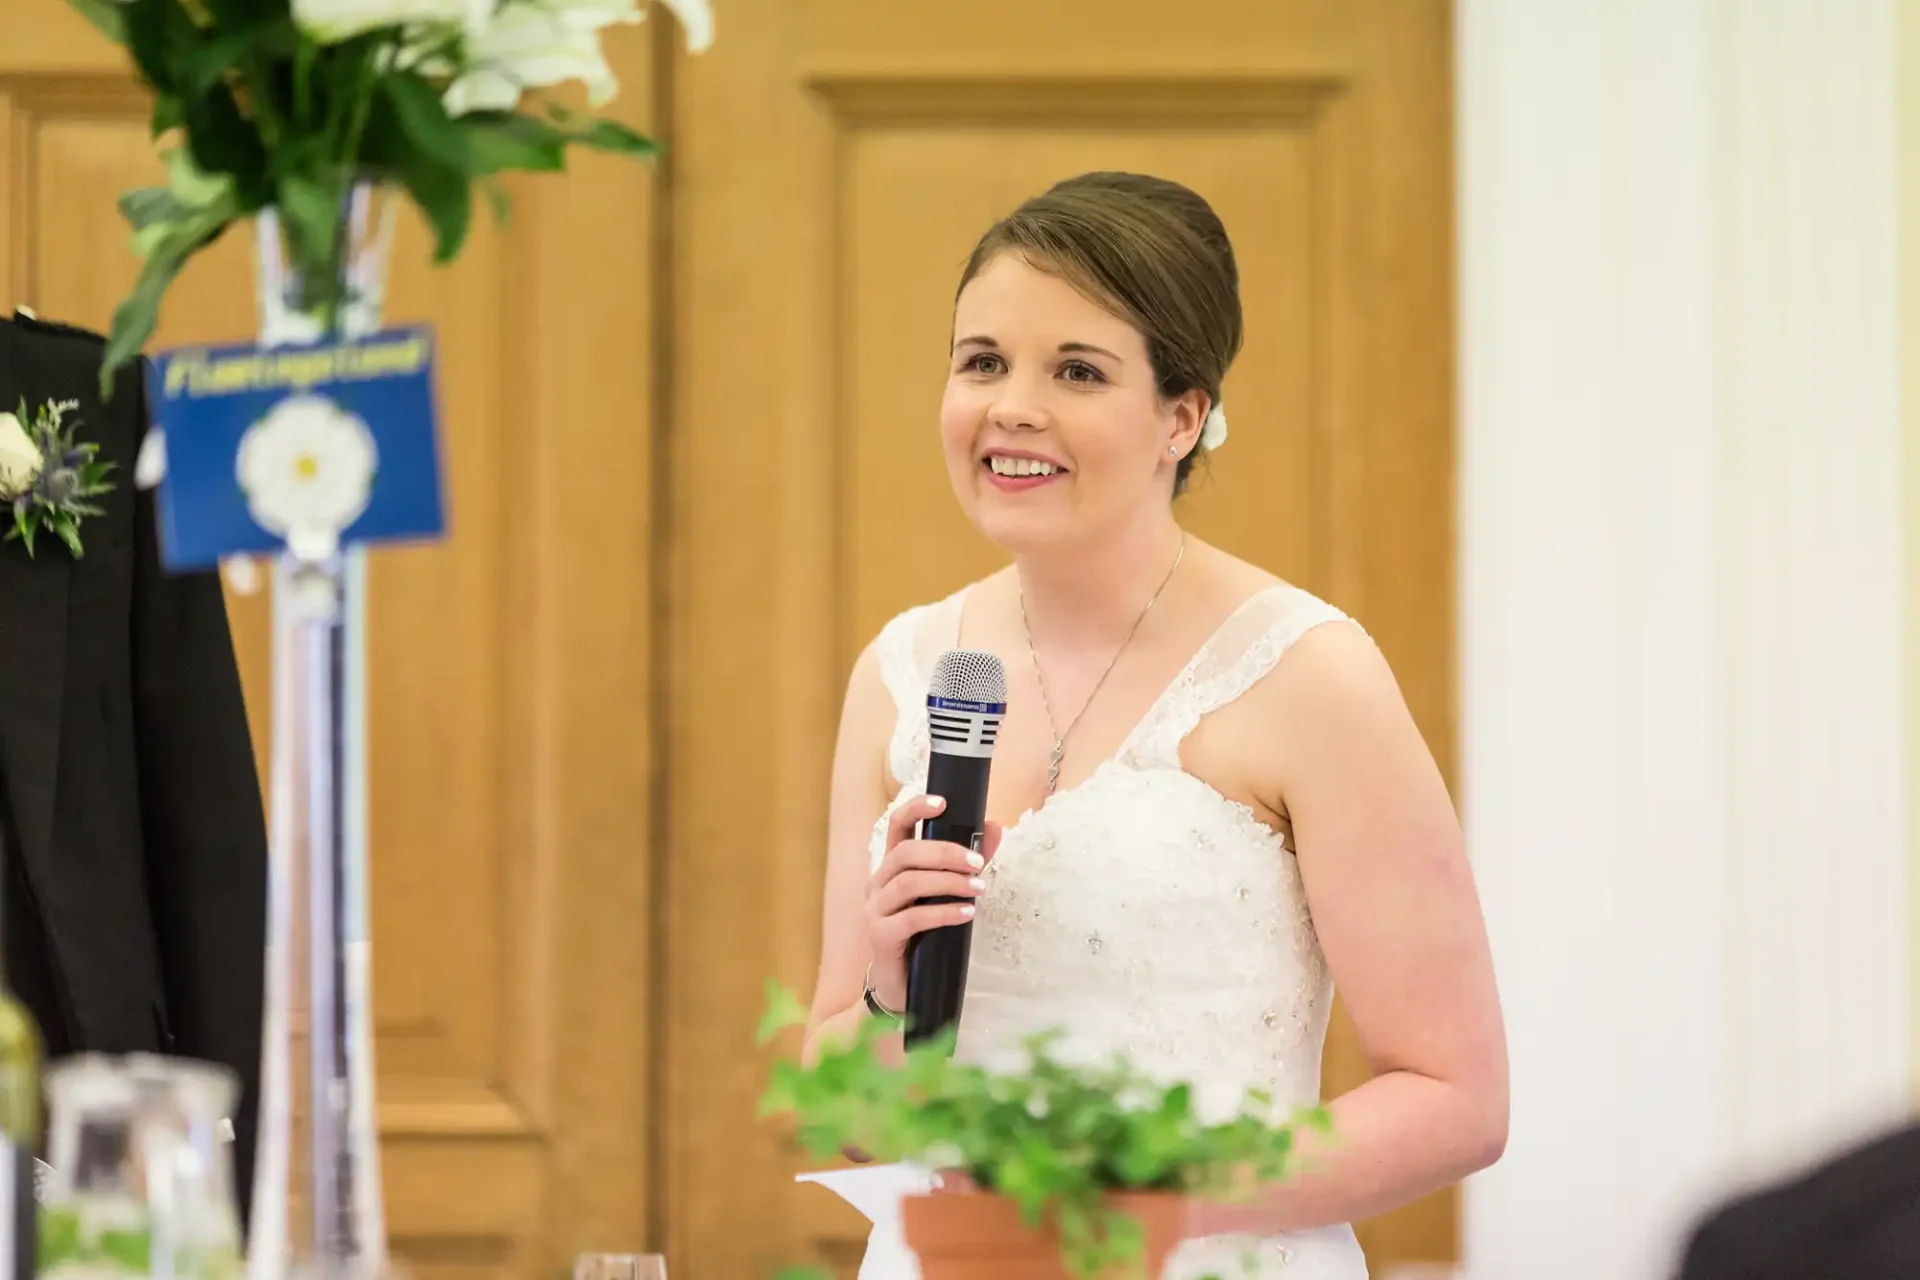 A bride in a white dress speaking into a microphone at a wedding reception, smiling, with guests and floral decorations in the background.